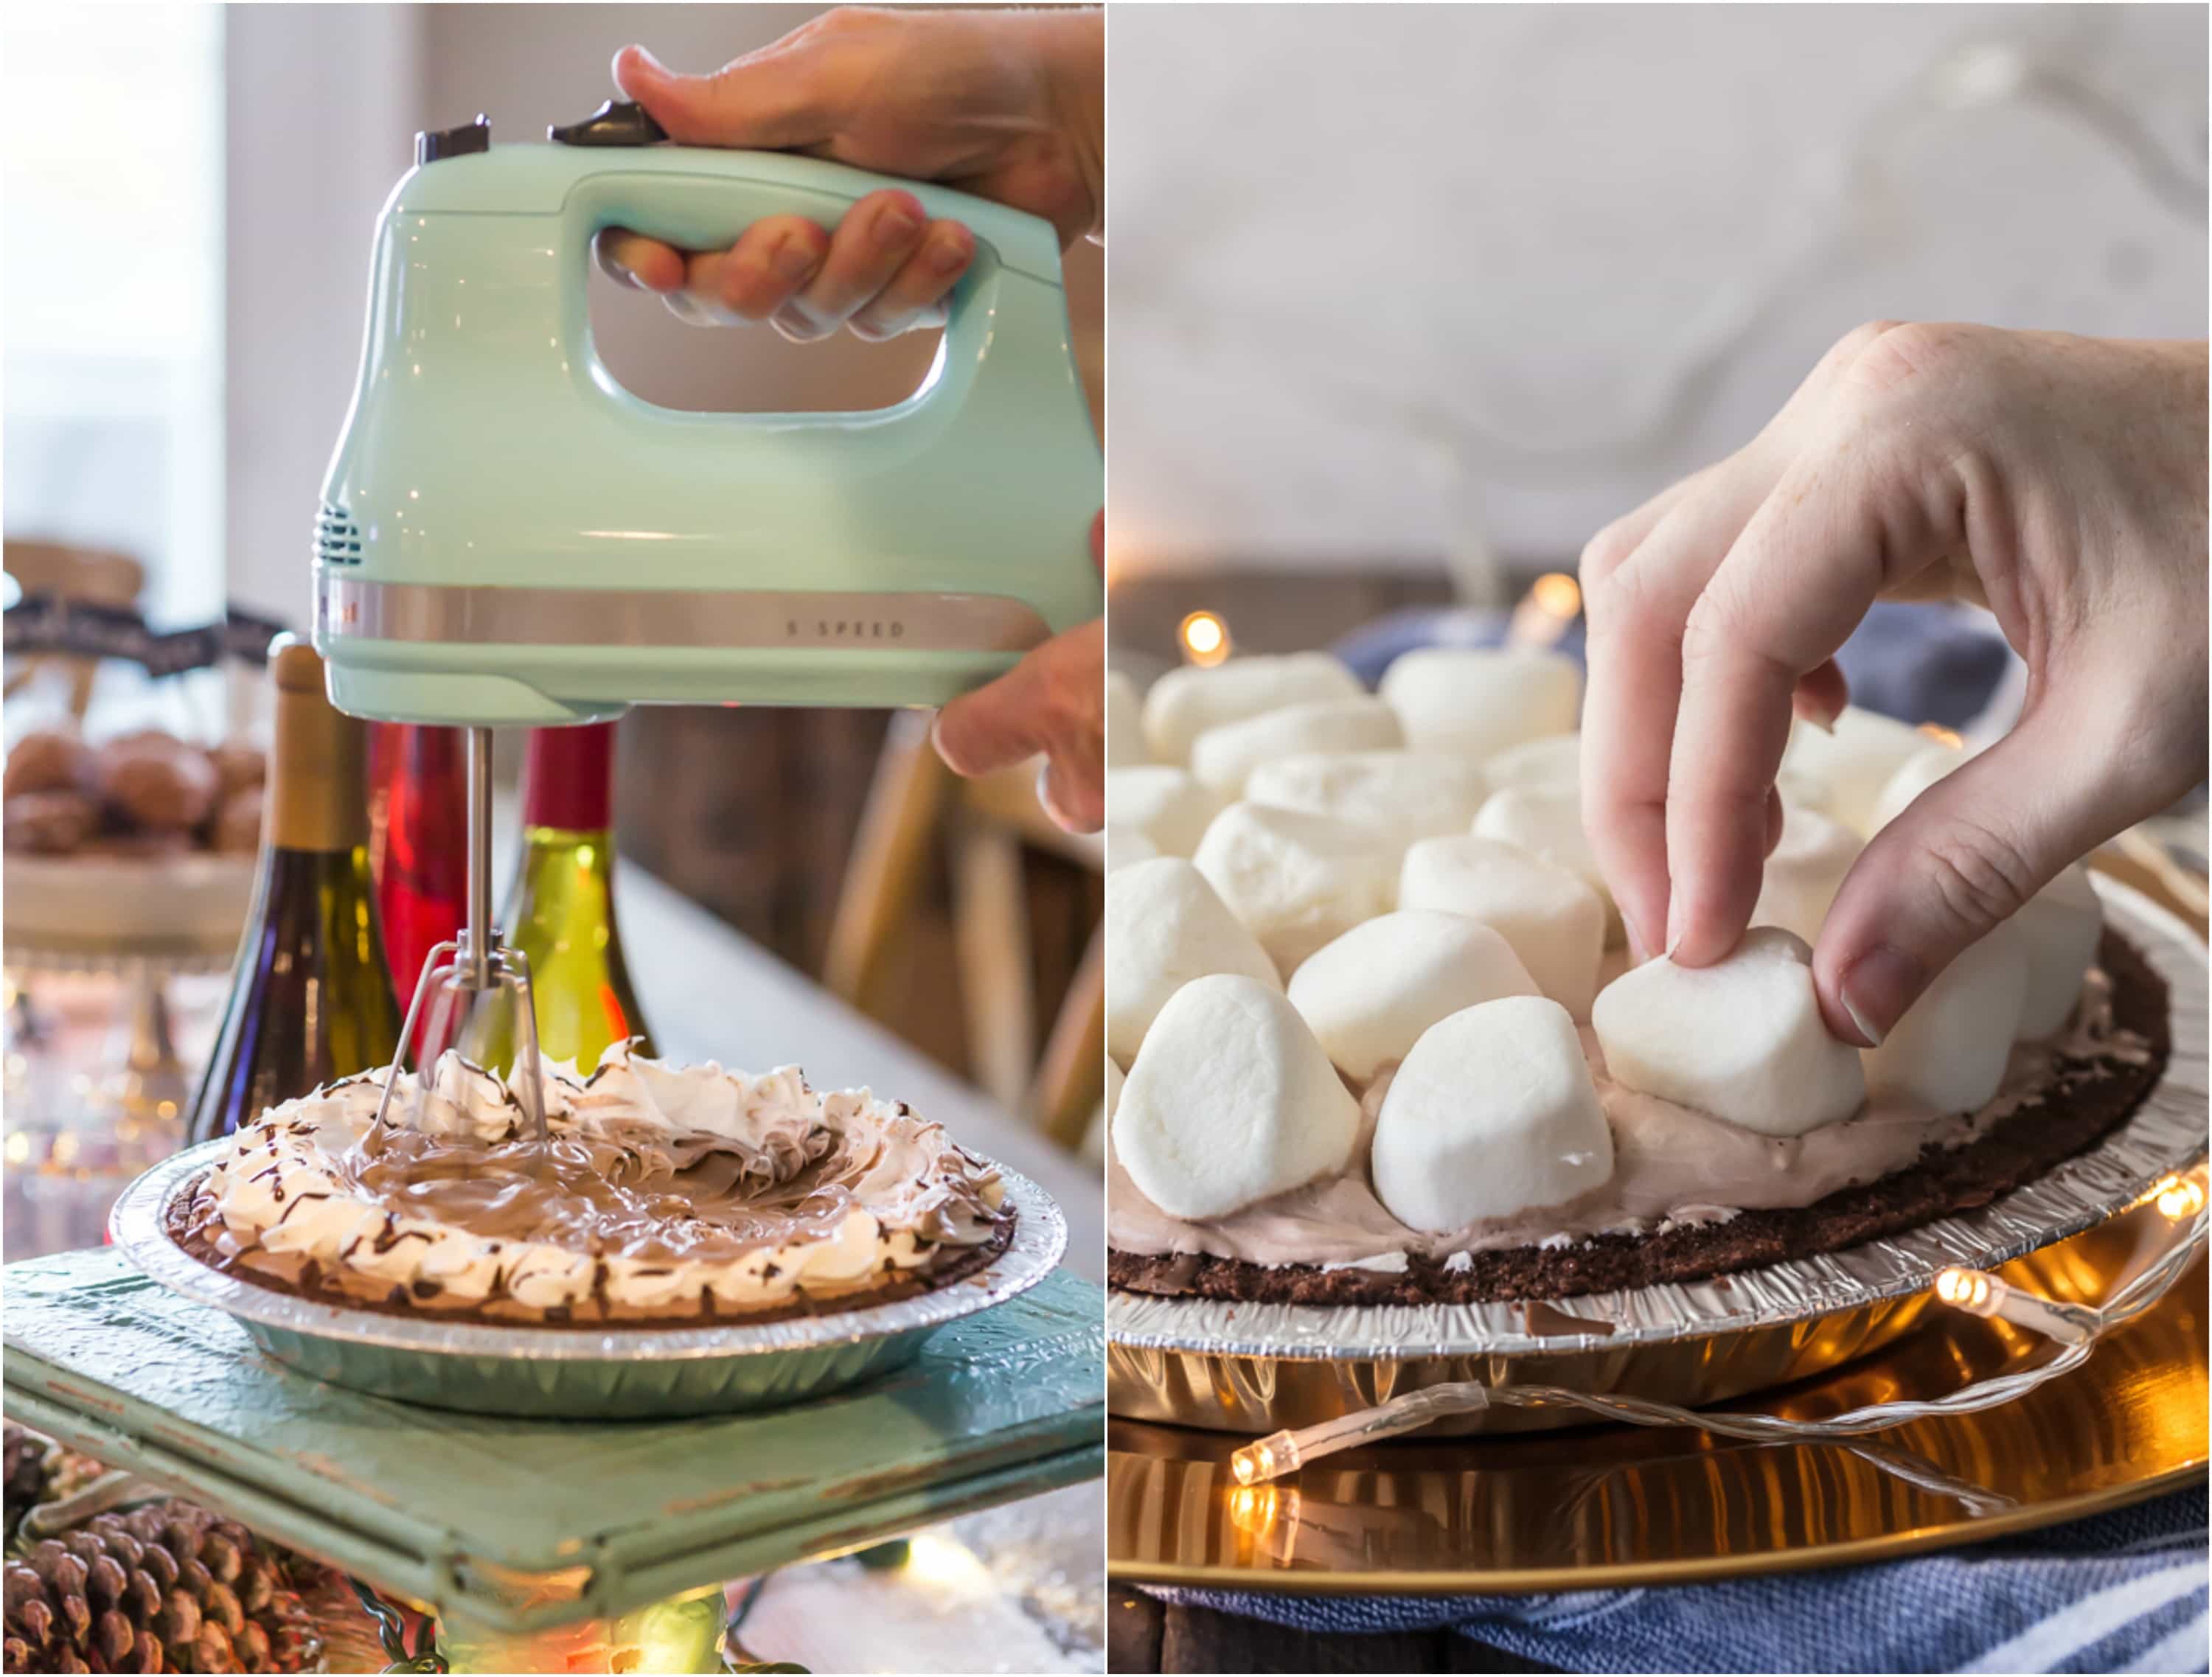 Have a HOLIDAY PIE PARTY this Christmas and wow your guests with fun twists on classic pies! Use your favorite pies to make Deep Fried Pecan Pie Bites and Chocolate Pie S'mores Dip for all of the flavor and none of the fuss.